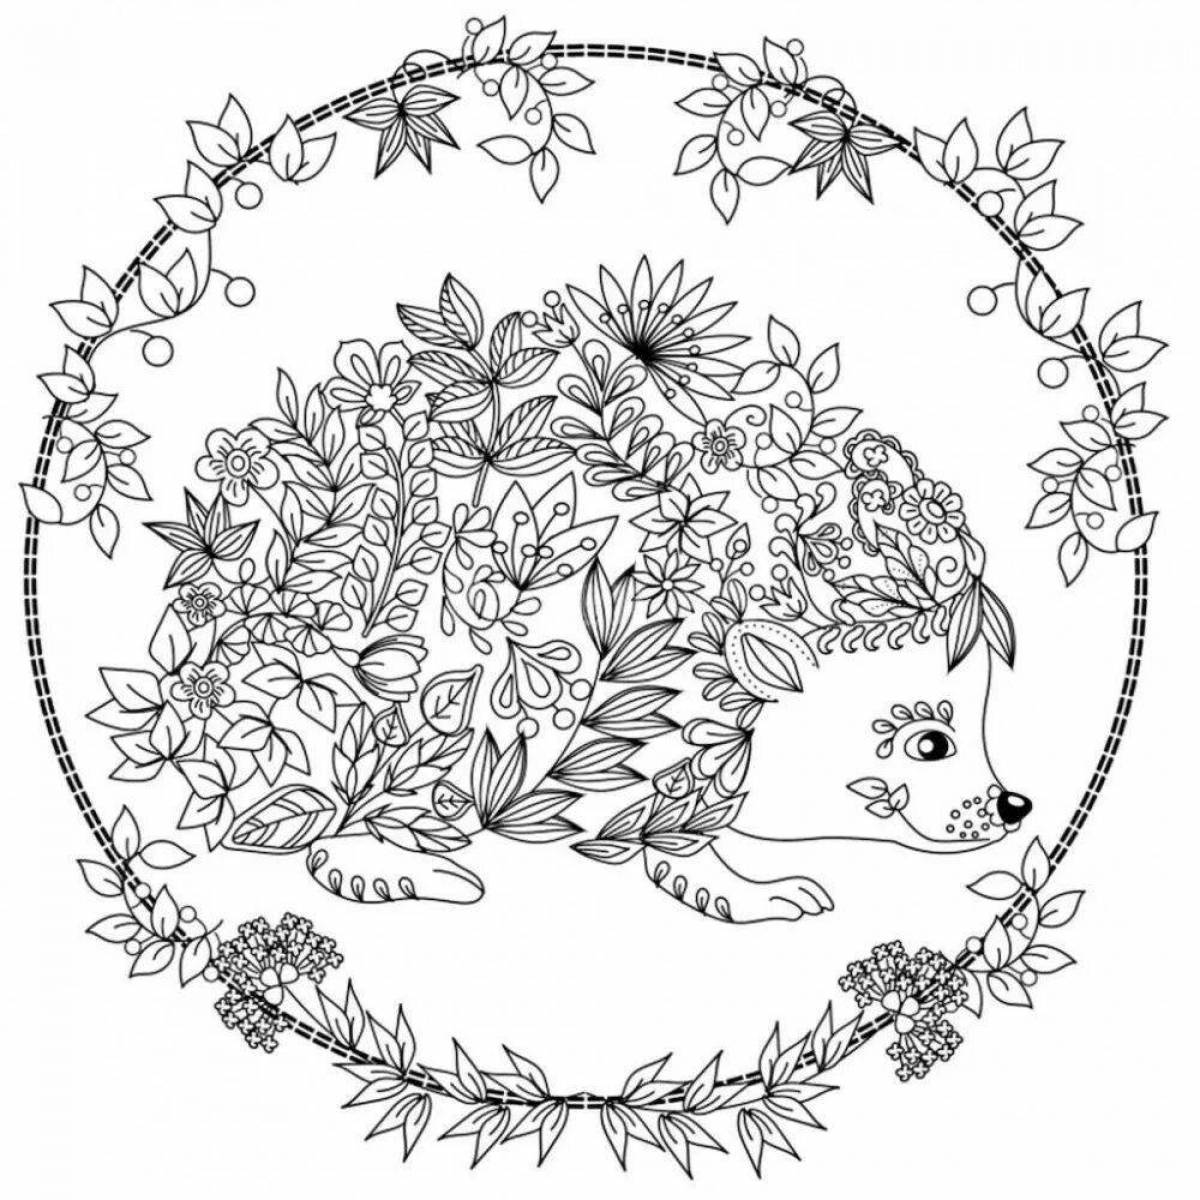 Coloring book gorgeous anti-stress hedgehog